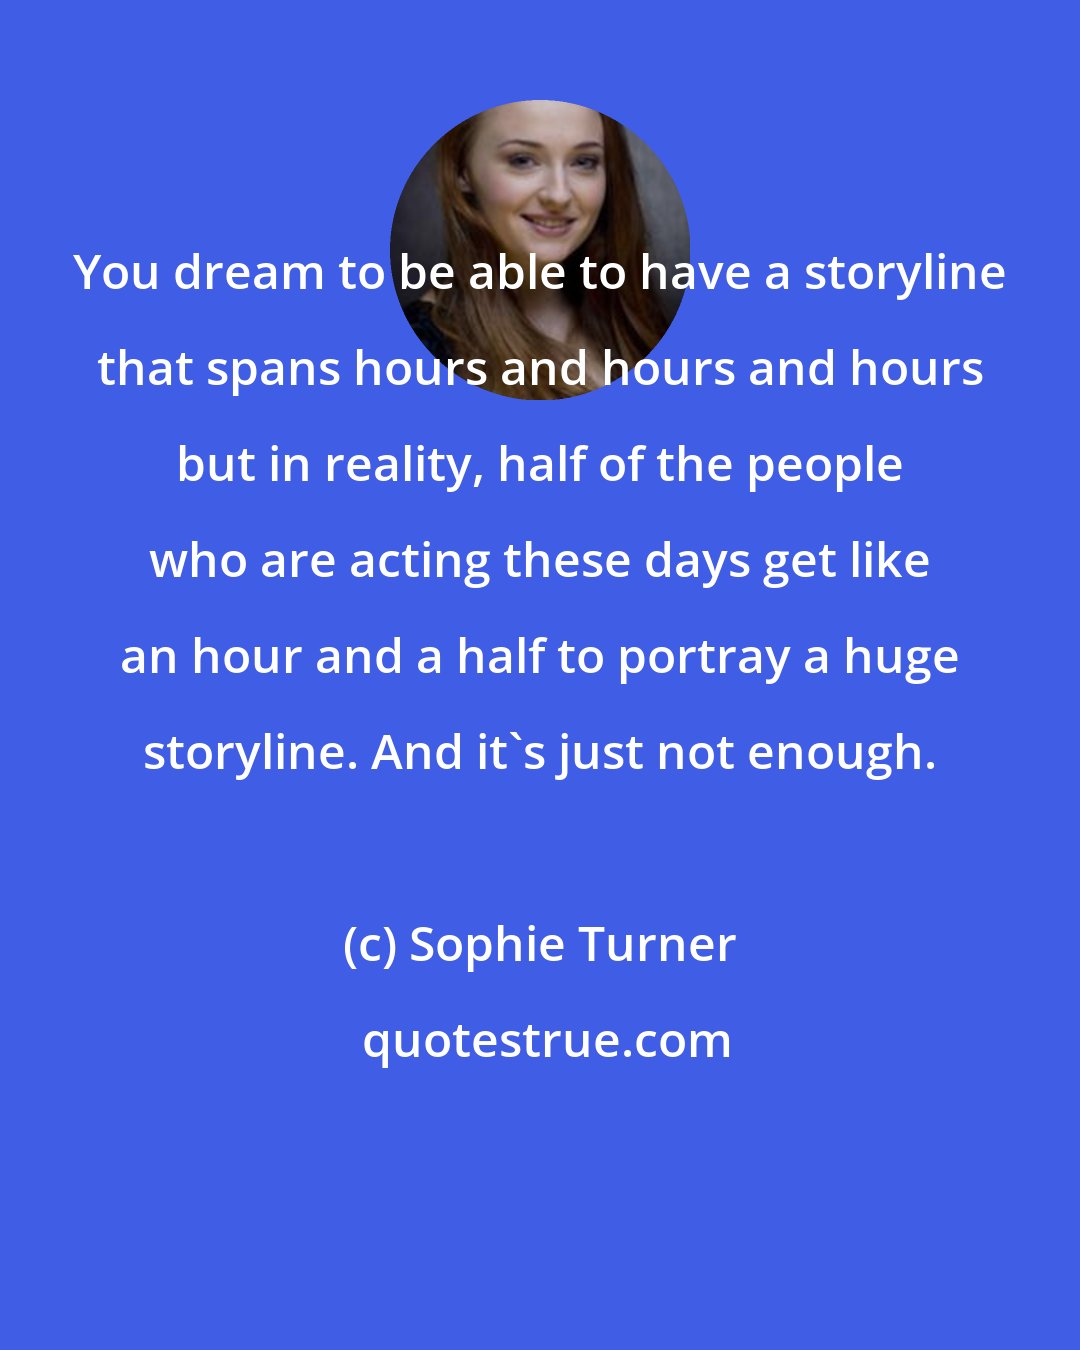 Sophie Turner: You dream to be able to have a storyline that spans hours and hours and hours but in reality, half of the people who are acting these days get like an hour and a half to portray a huge storyline. And it's just not enough.